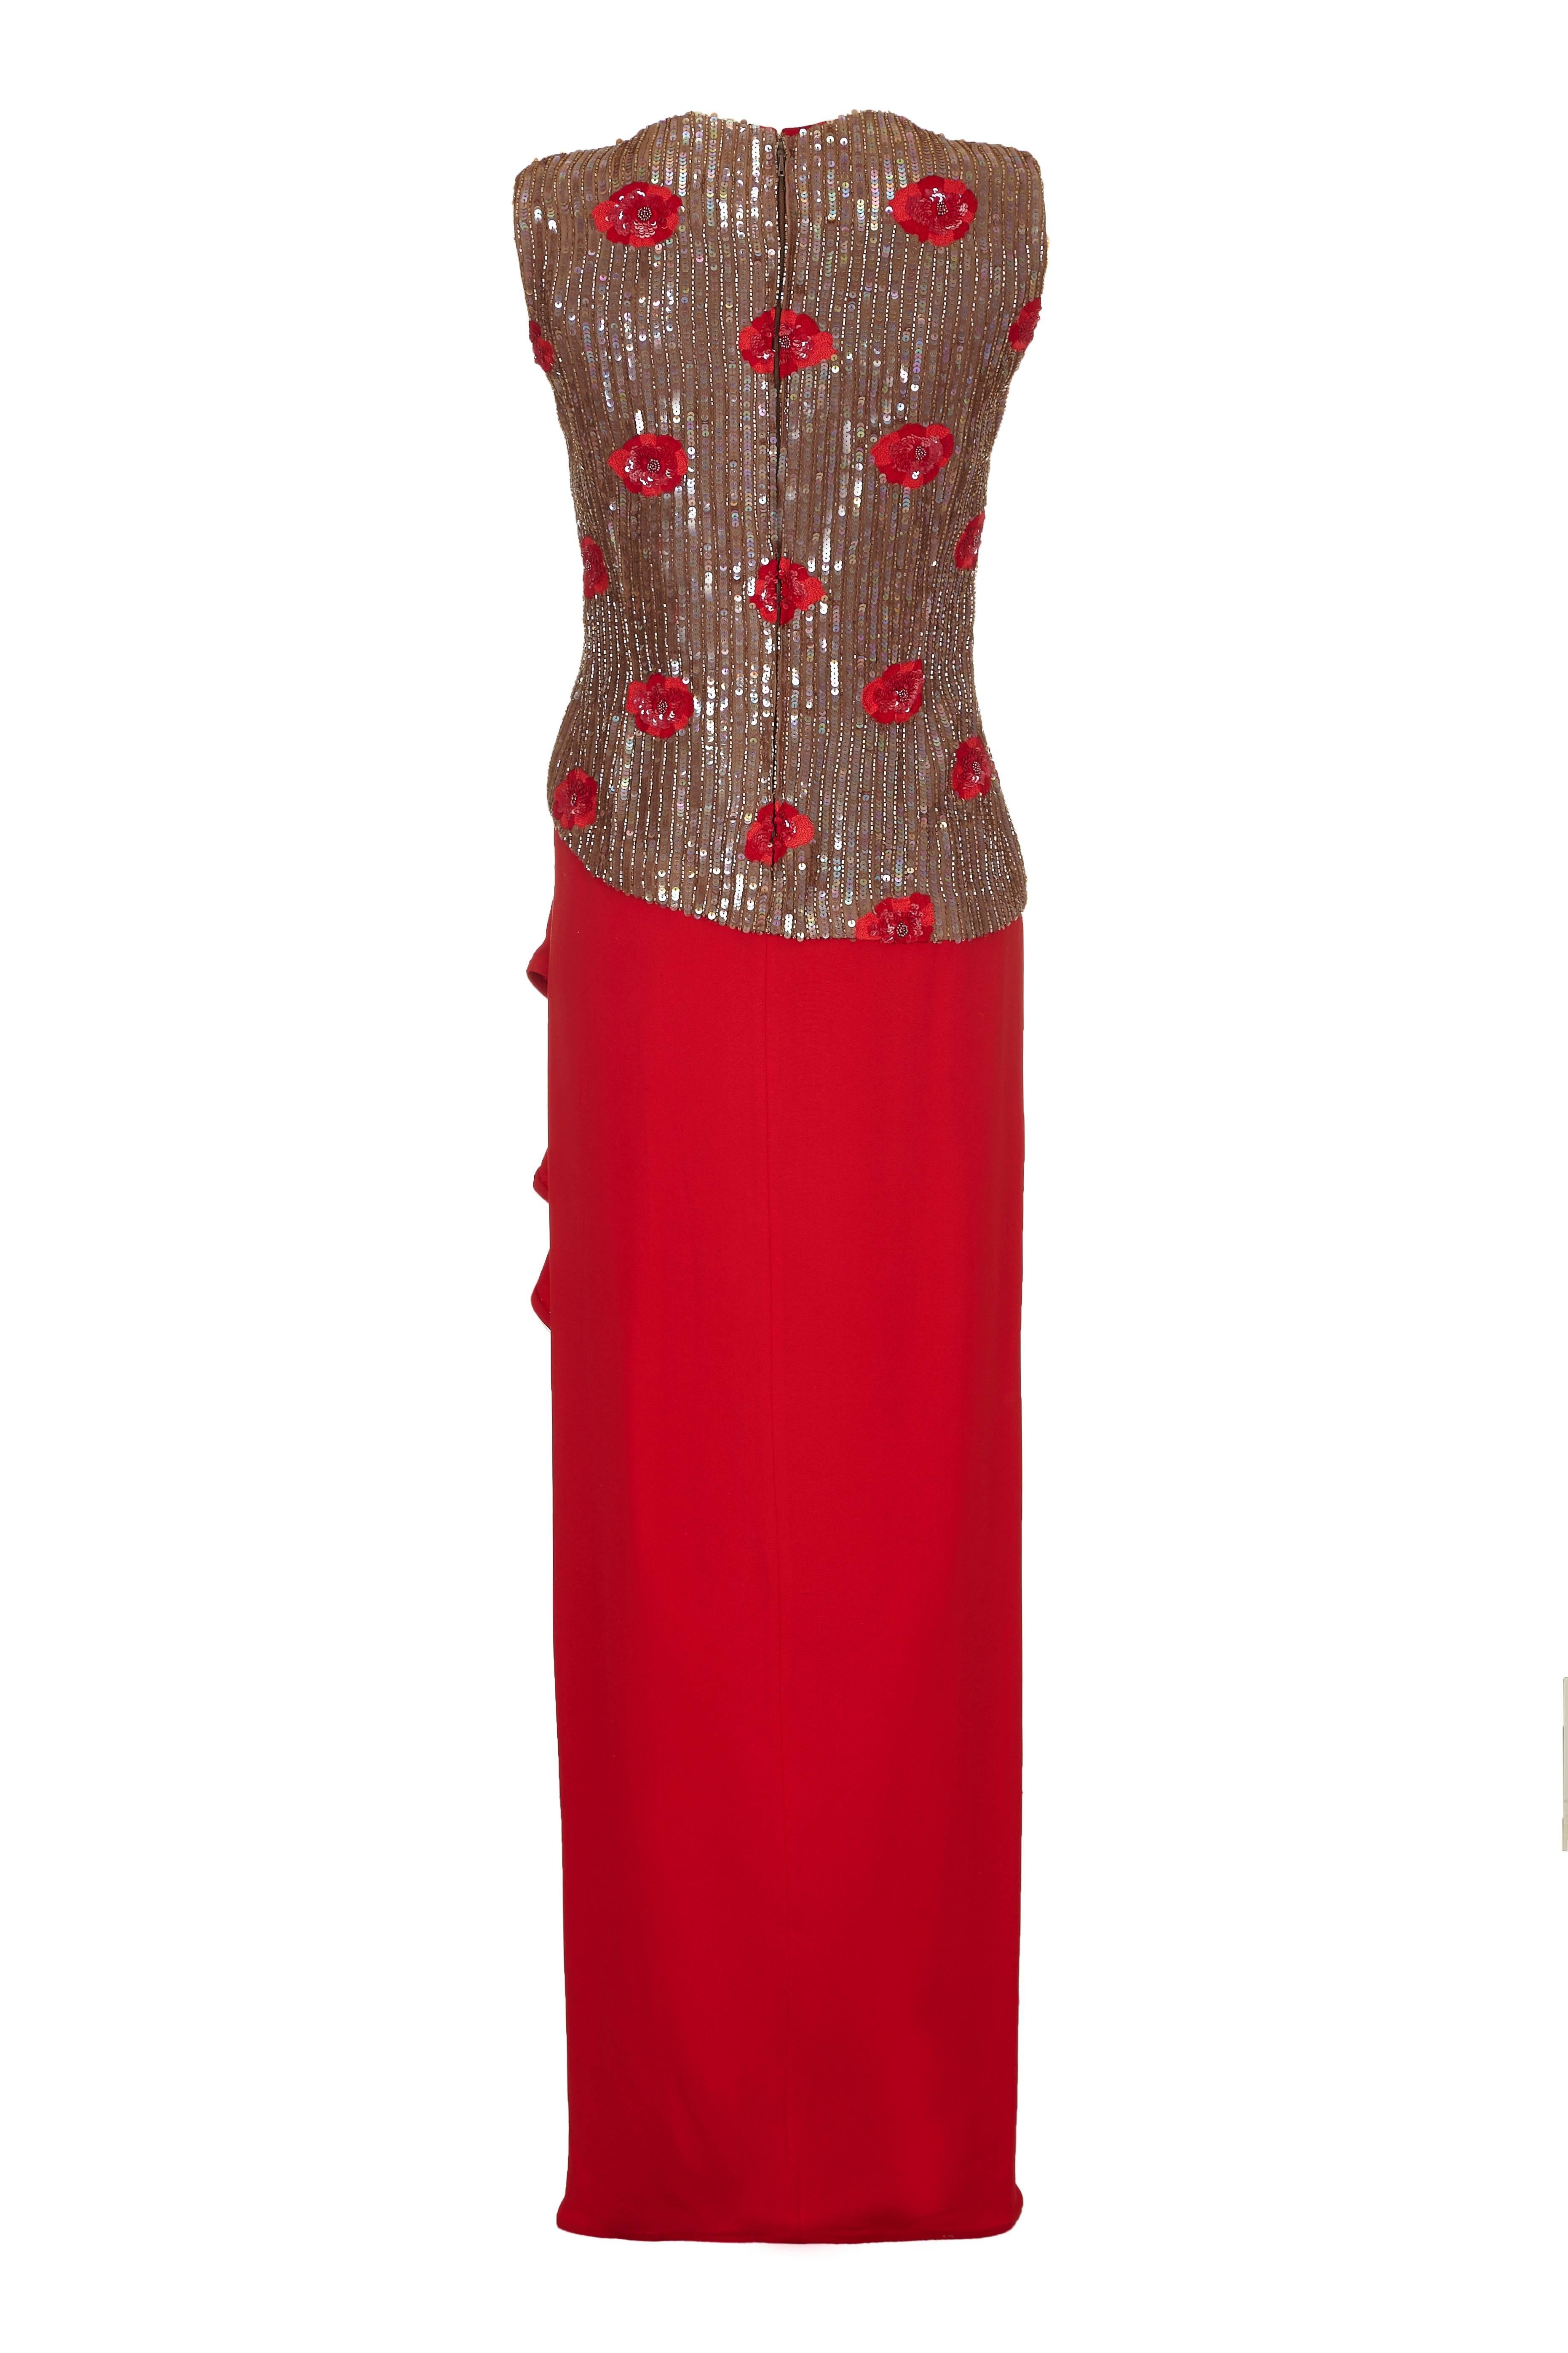 Fabulous vintage haute couture 1970s red dress by Italian designer Andre Laug.  This dress features a sequinned bodice with pretty embroidered red flowers and a wrap over fine crepe skirt with a ruffle front opening.  Beautifully made and in